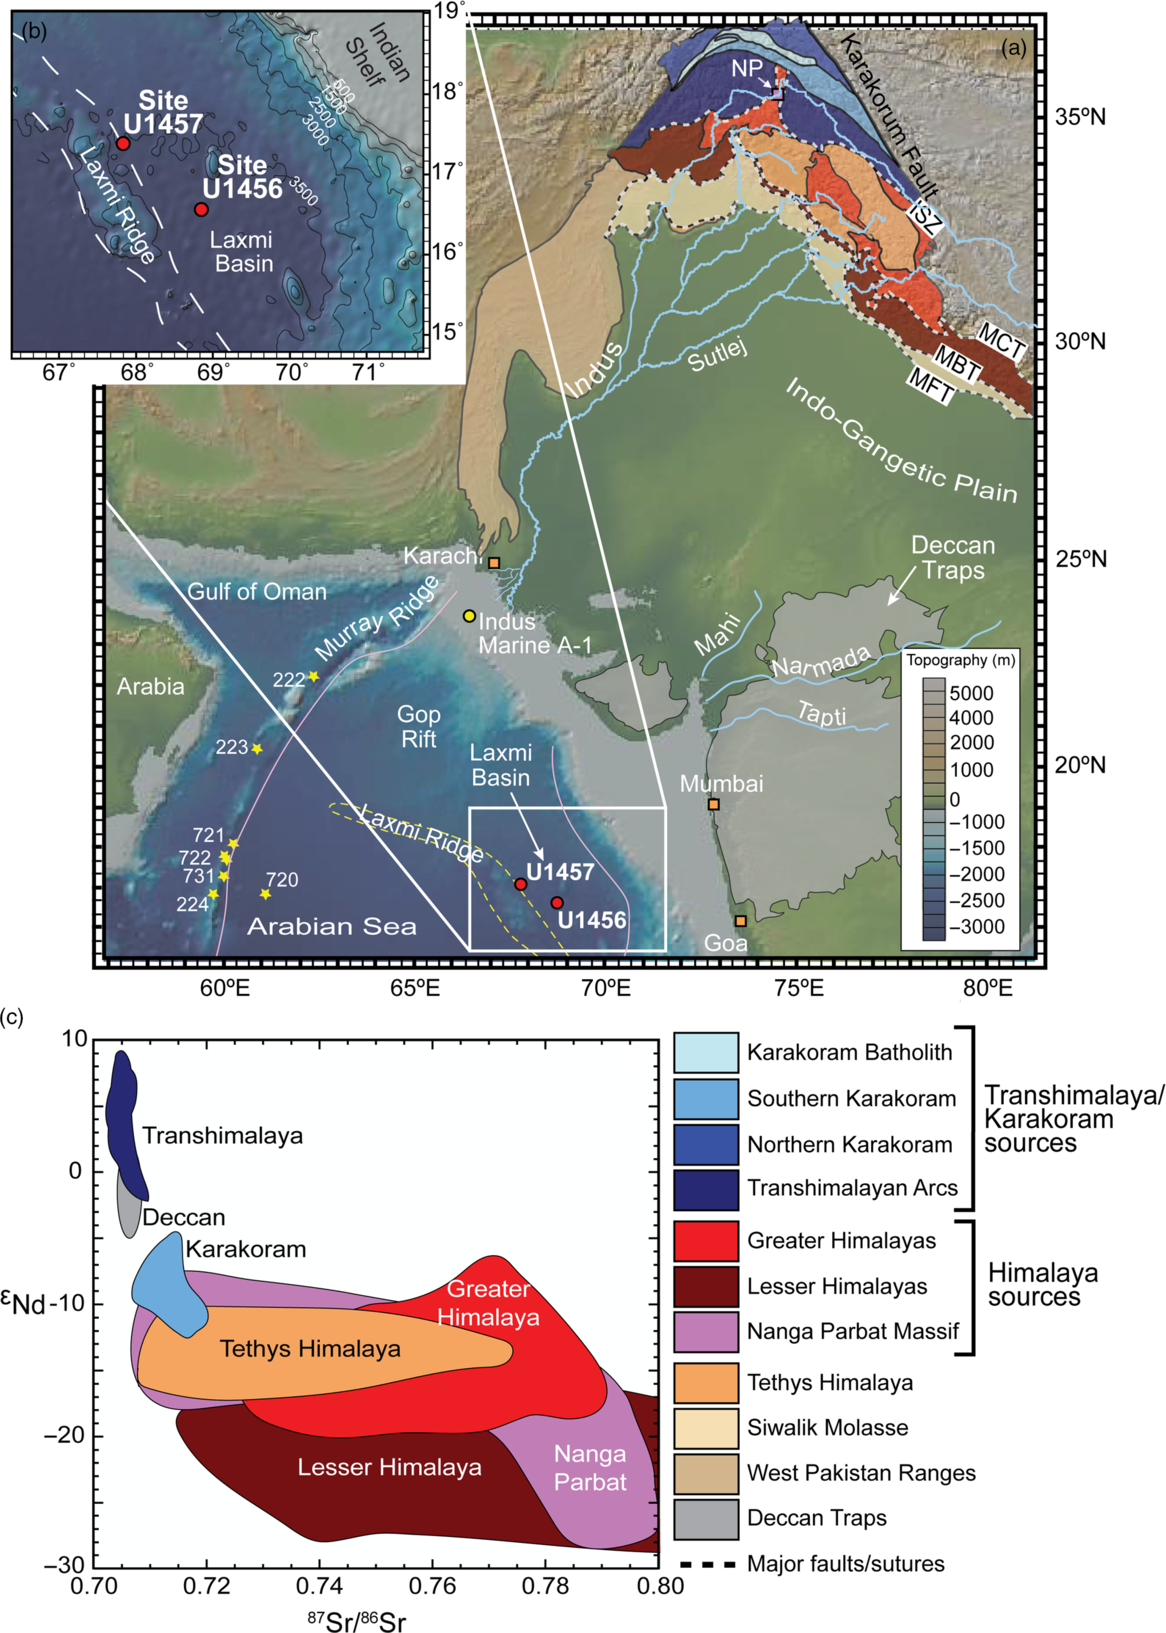 Clay Fraction Strontium And Neodymium Isotopes In The Indus Fan Implications For Sediment Transport And Provenance Geological Magazine Cambridge Core